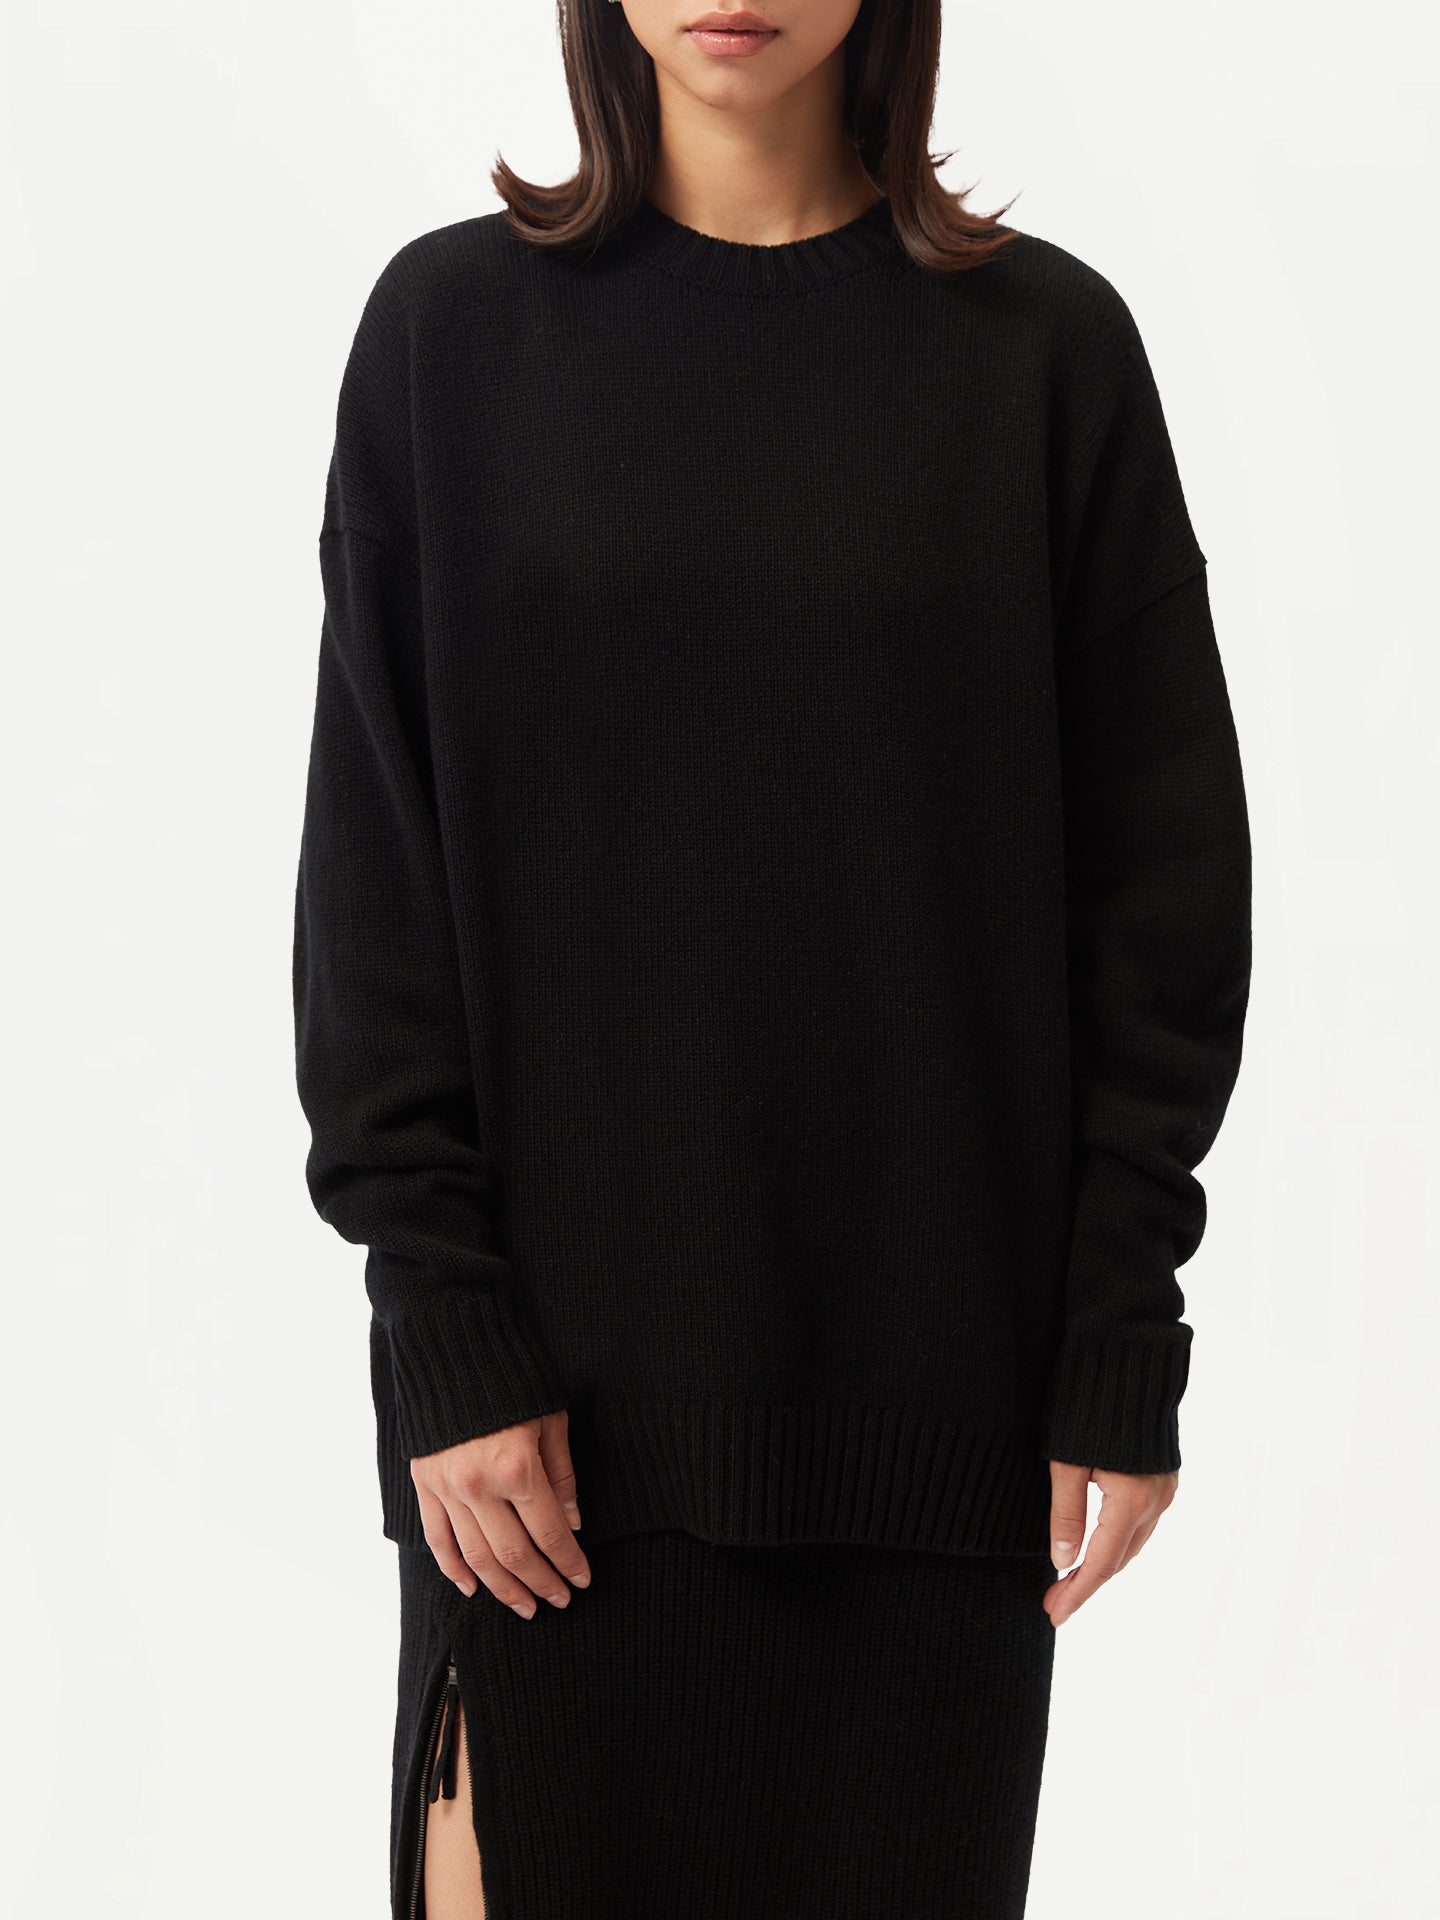 Women's Relaxed-Fit Cashmere Sweater Black - Gobi Cashmere